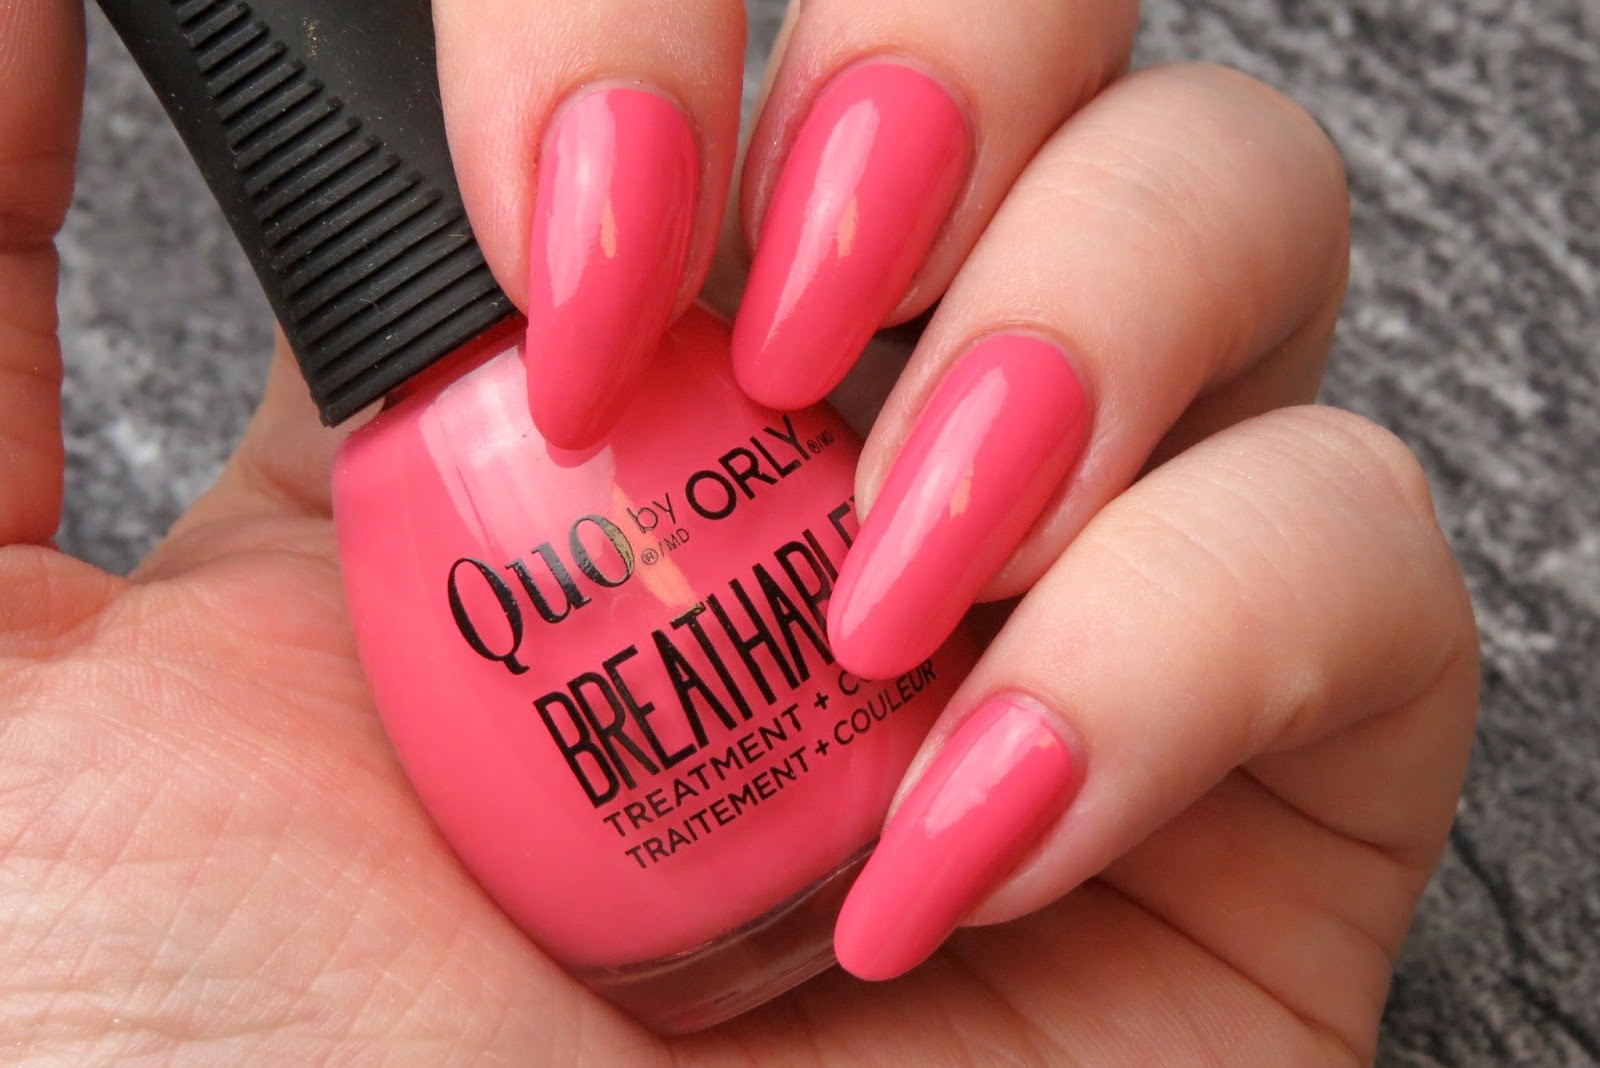 10. Orly Breathable Treatment + Color Nail Polish - wide 7